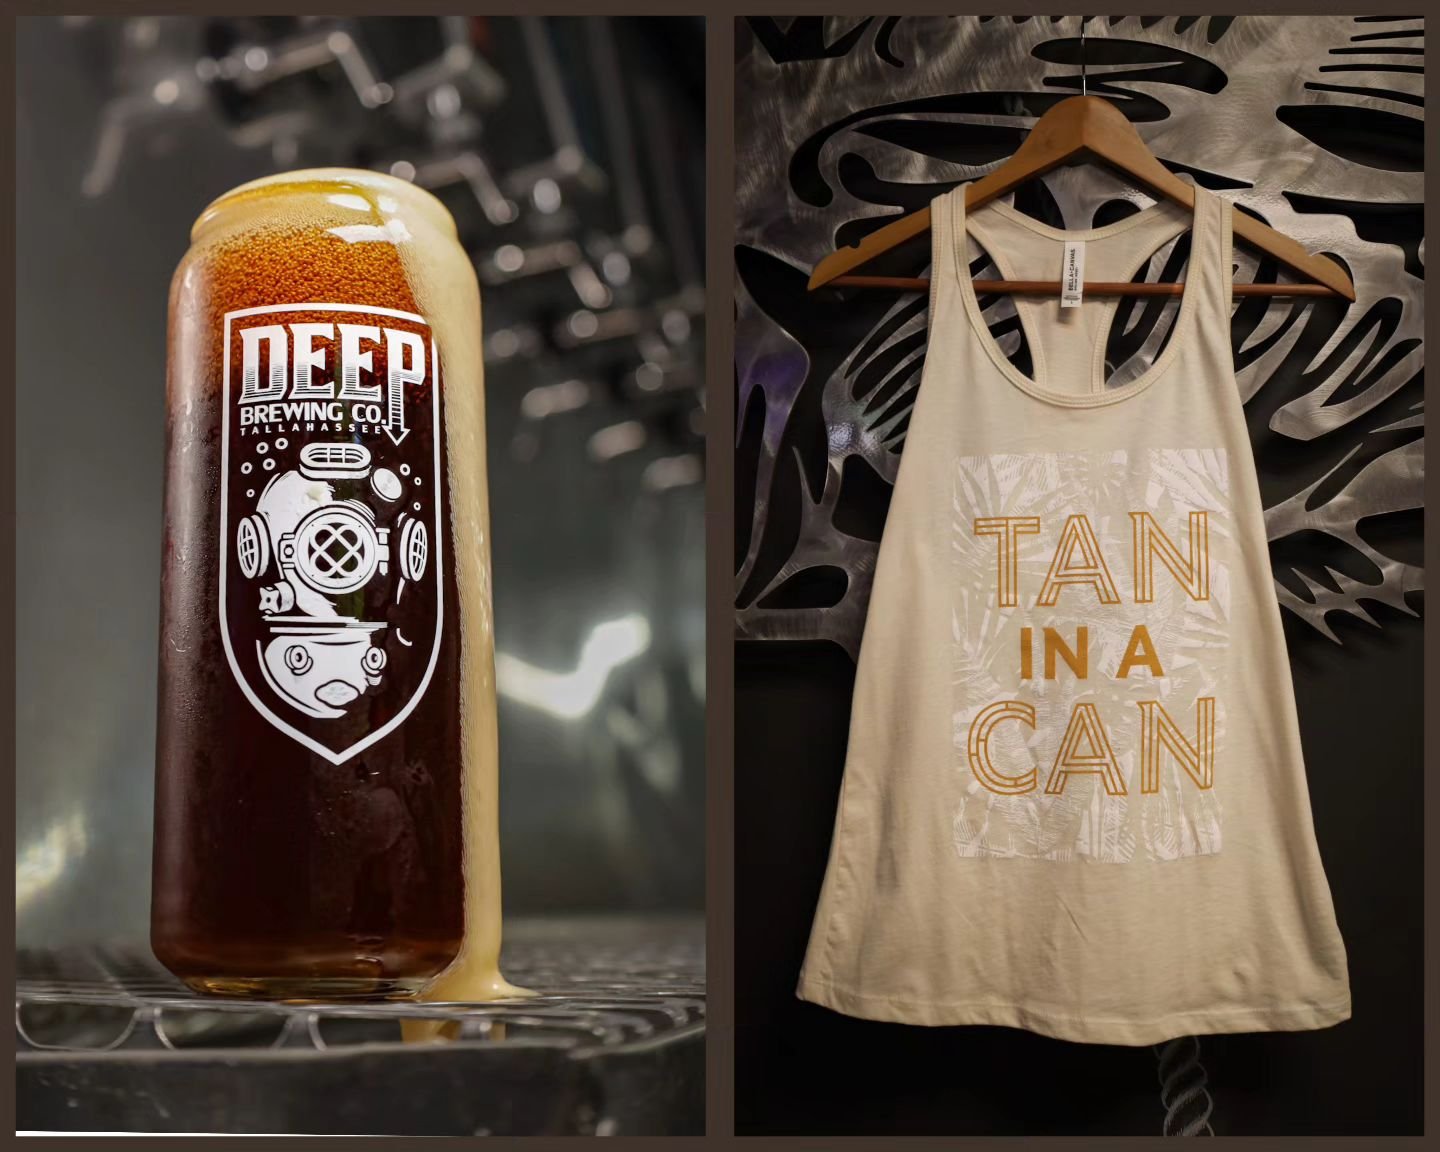 Our doors open for the week at 3 pm today, and just a reminder that we still have a few of our more recent swag items in the Deep store available!

On the left, our new &quot;Slim&quot; Deep beer-can style 16 oz pint glass.

And on the right, our TAN